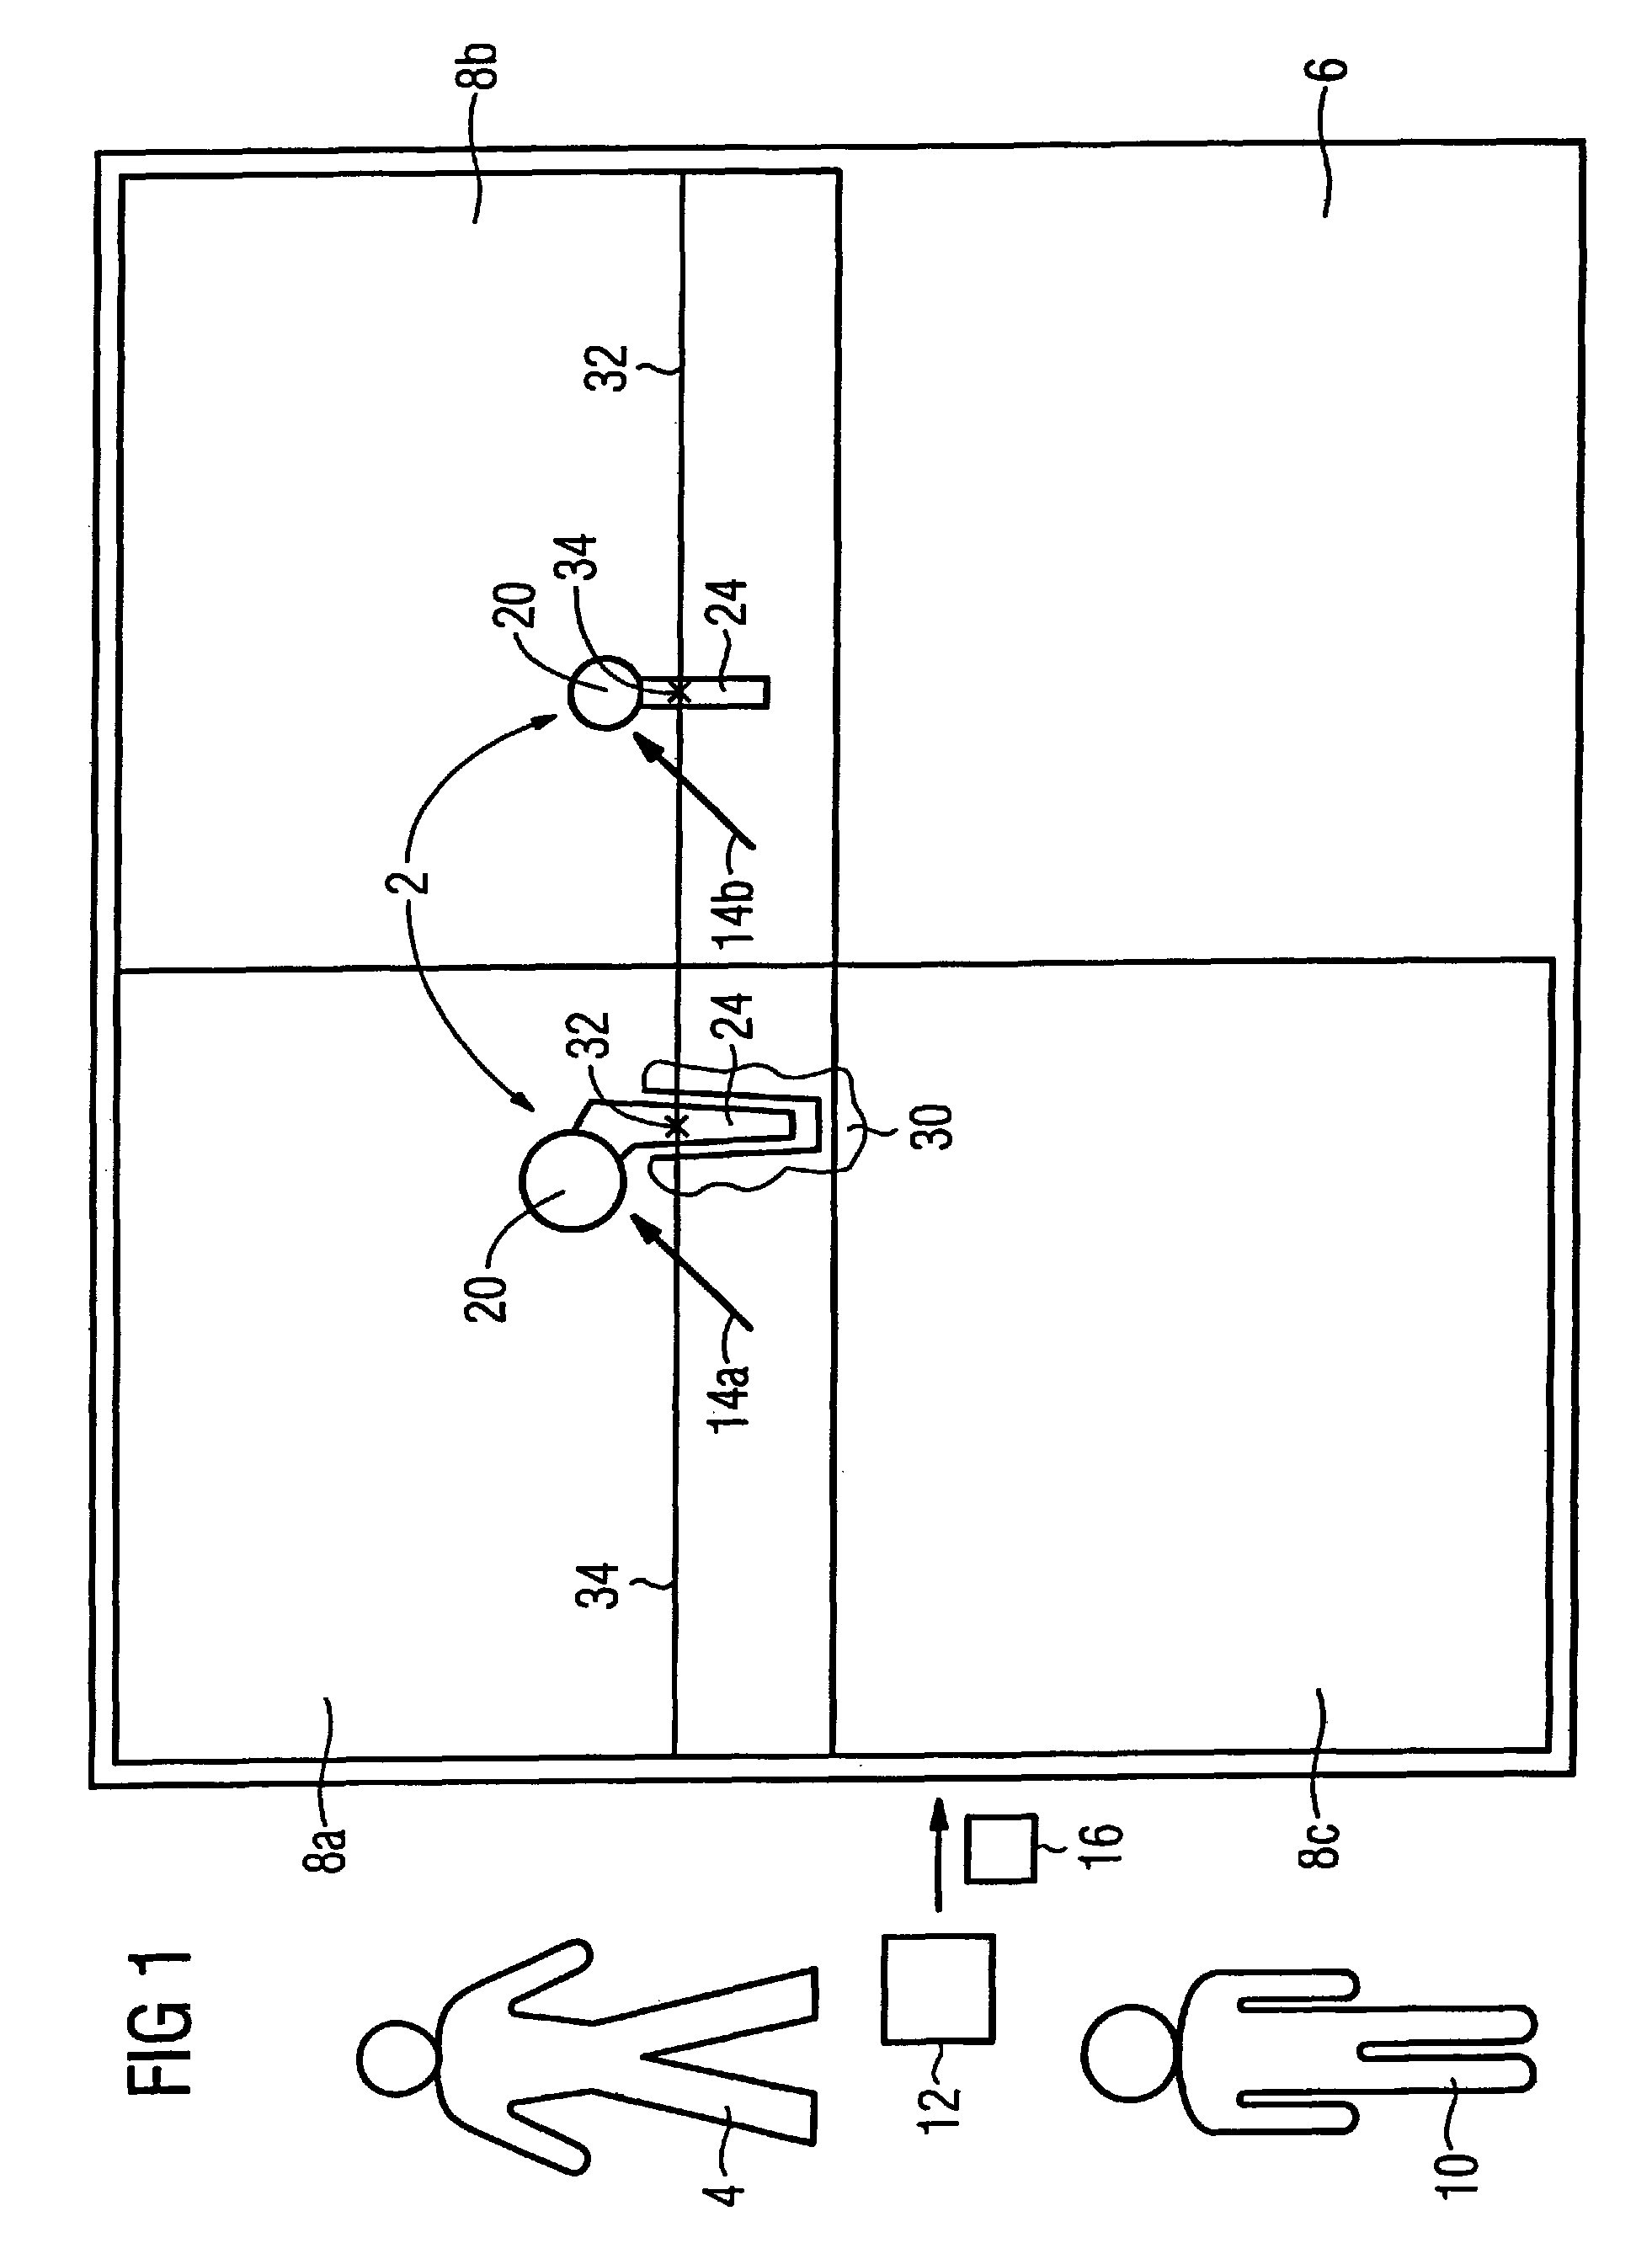 Method for virtual adaptation of an implant to a body part of a patient